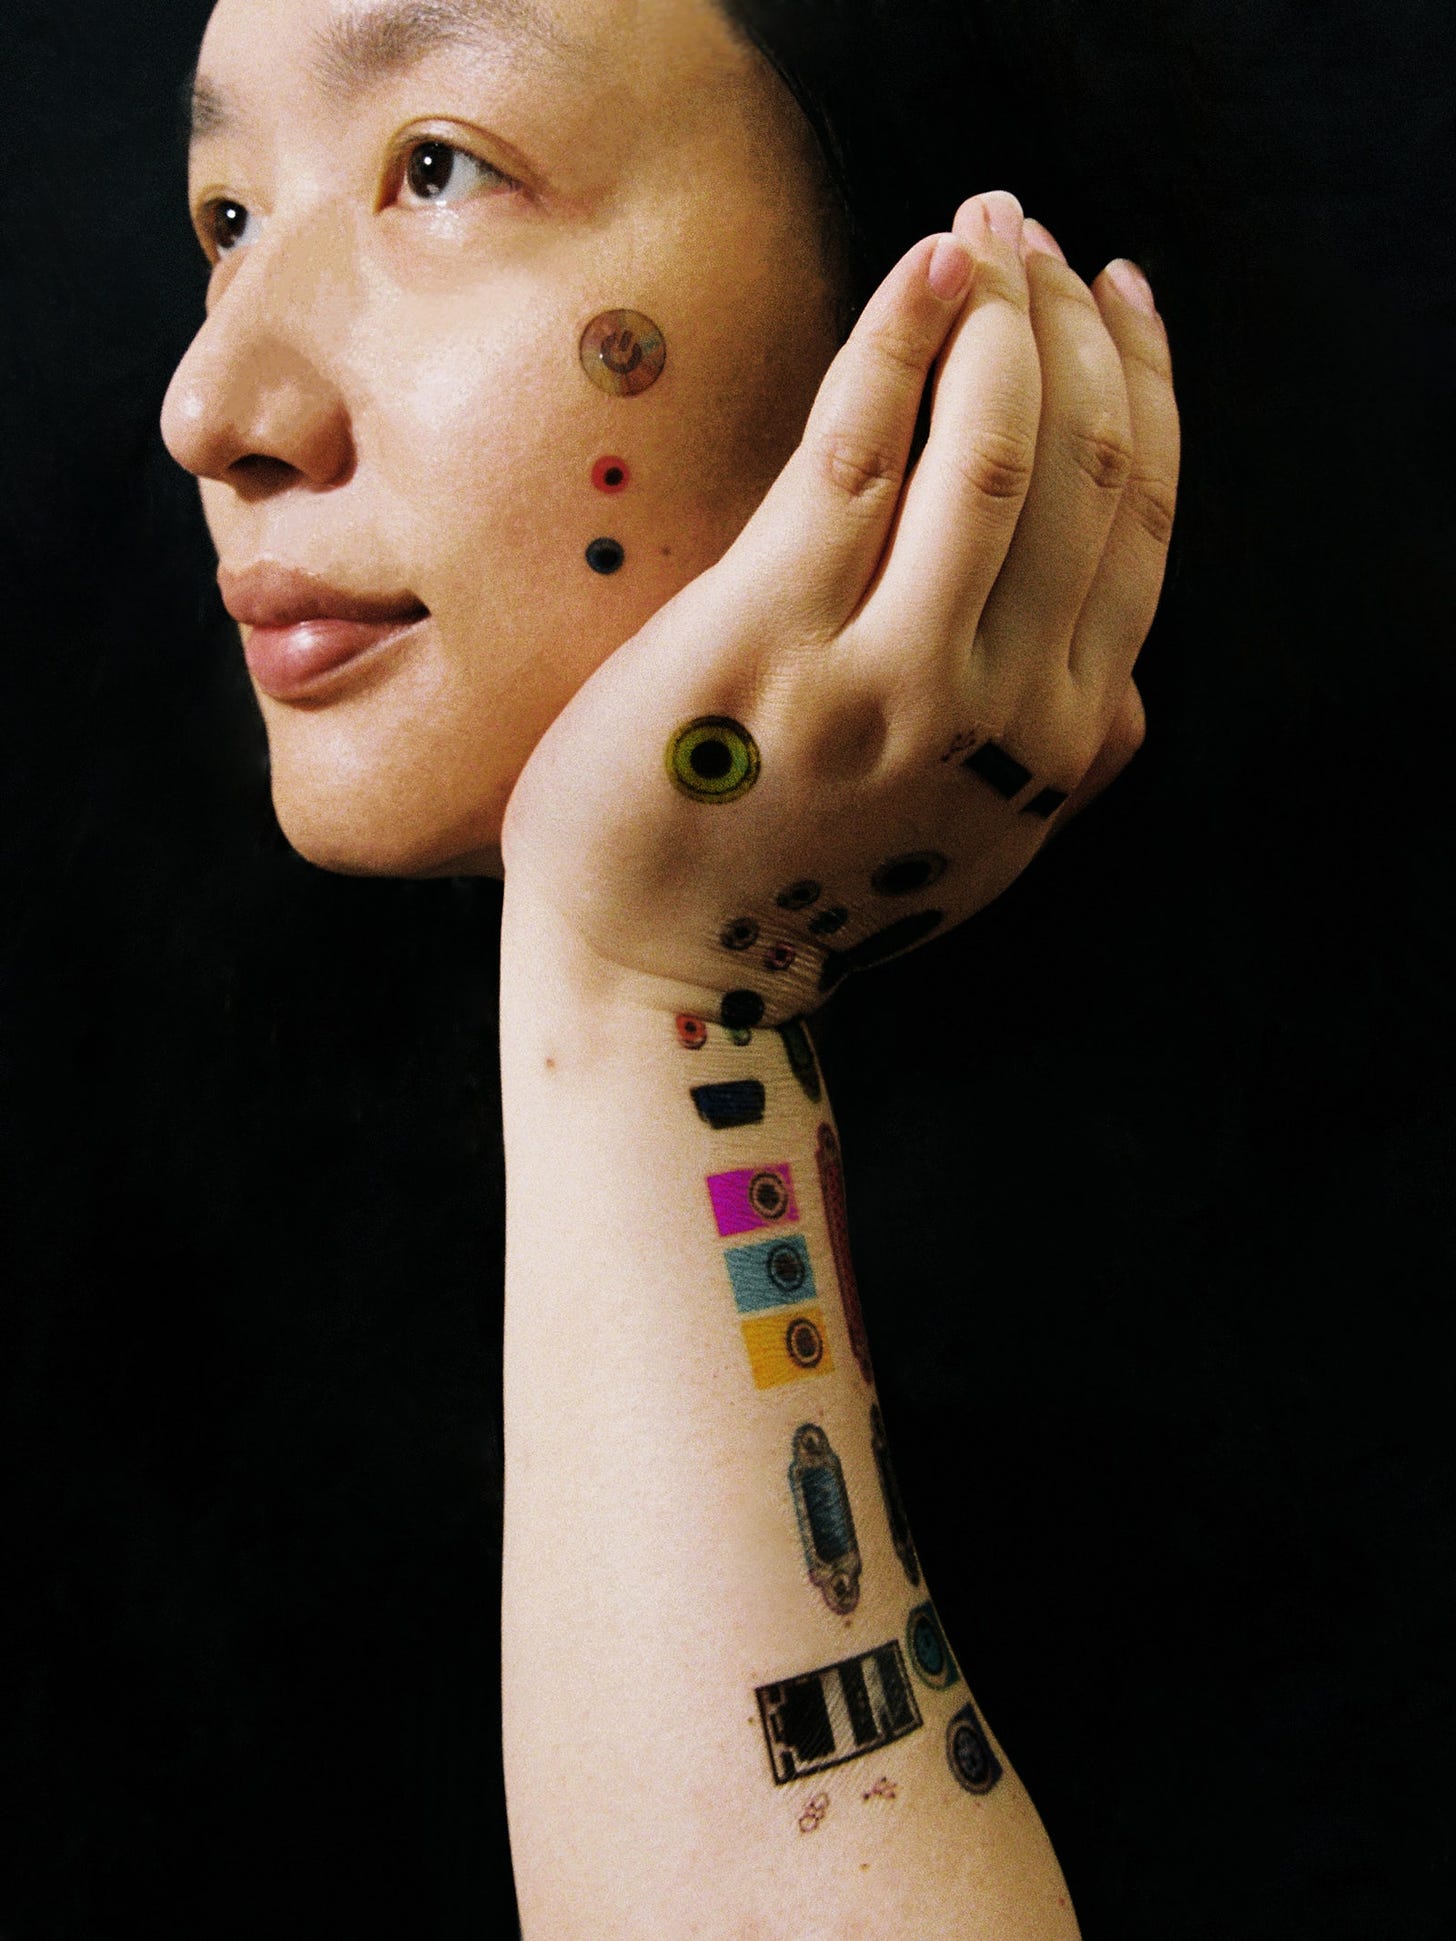 Audrey Tang with temporary tattoos of computer ports and power buttons on her face arm and hands